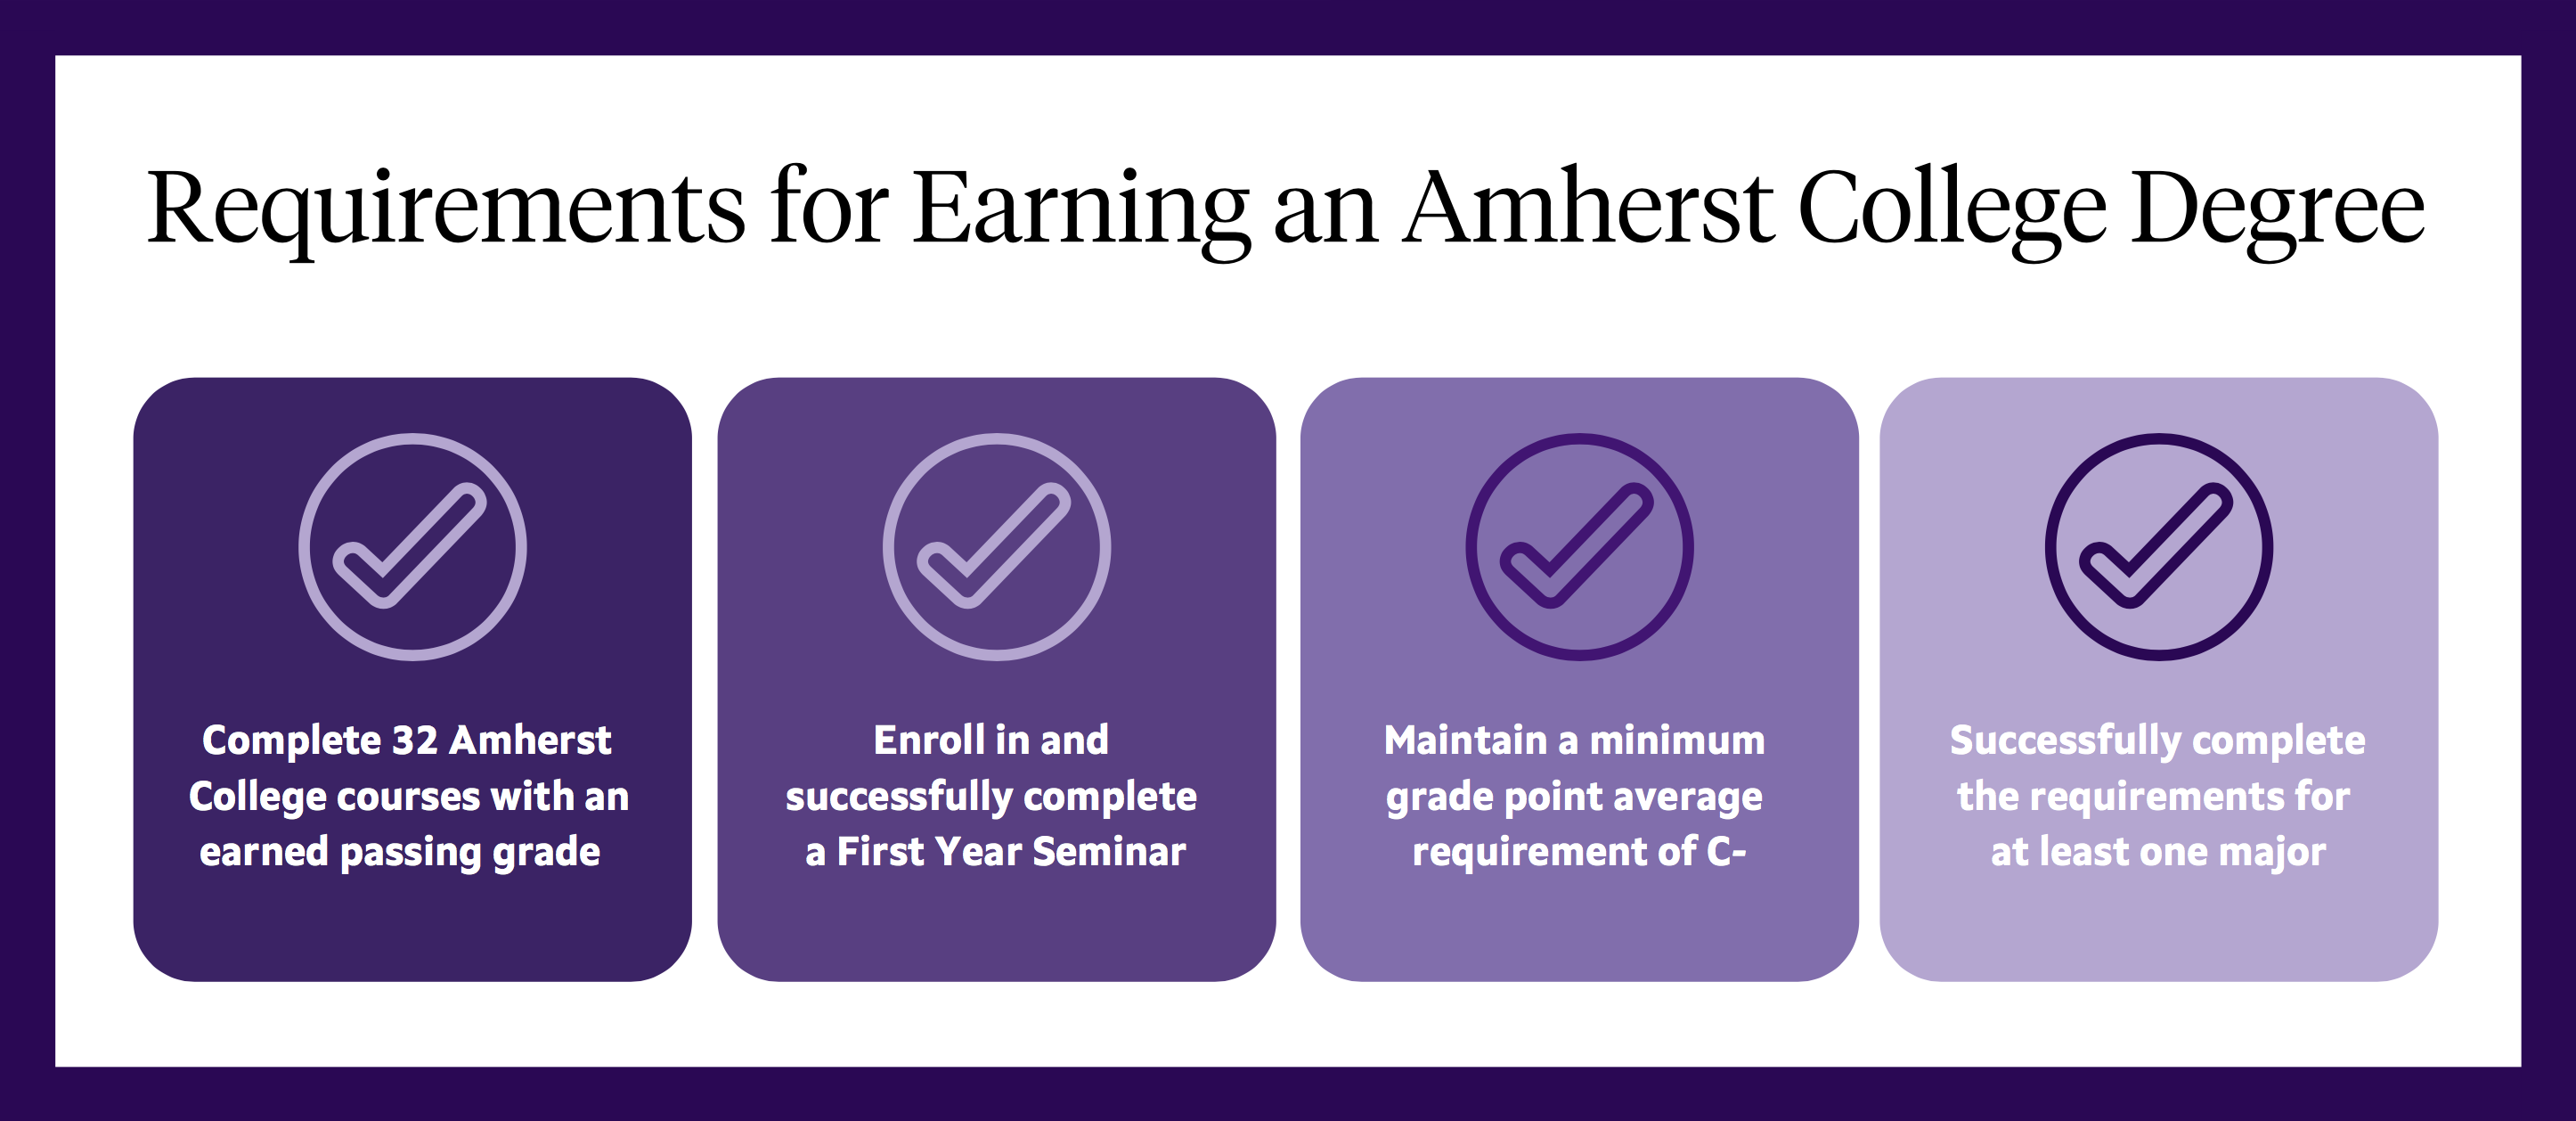 The four degree requirements for an Amherst College degree as outlined in the text on the page